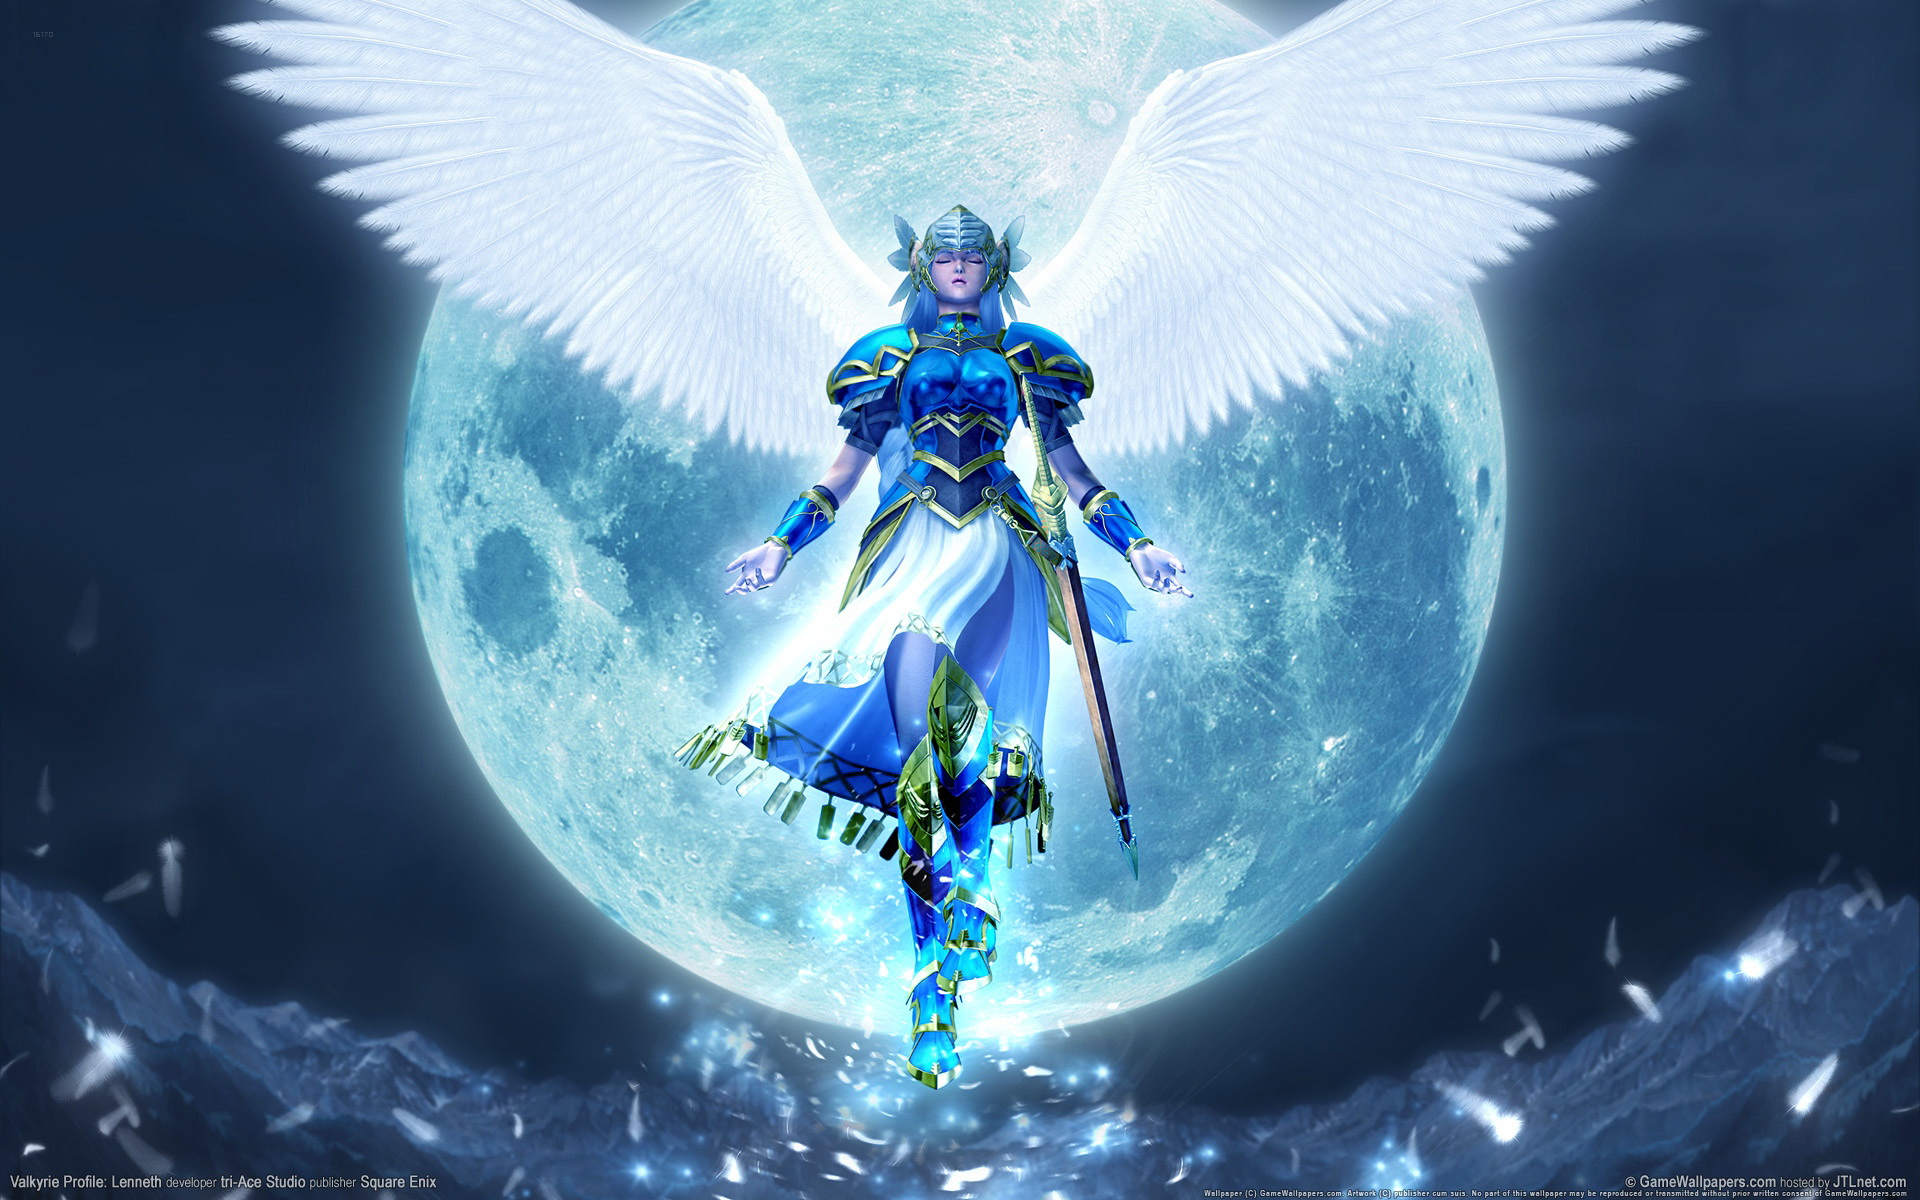 valkyrie profile, video game